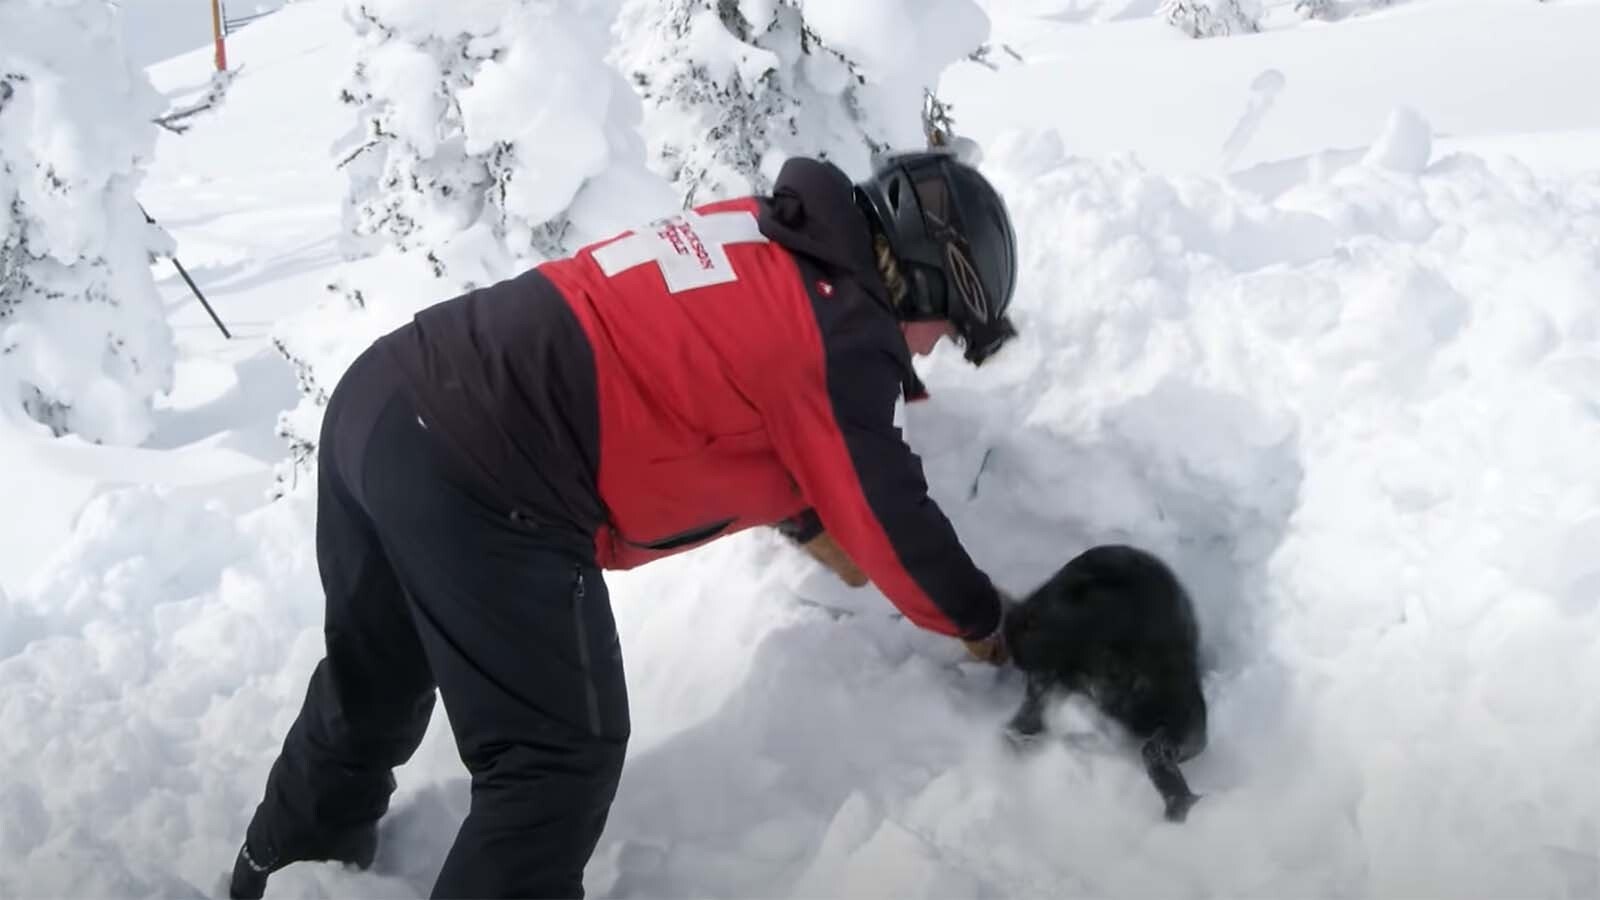 When they're not living a rock star lifestyle as ski slope celebrities, the Jackson Hole Mountain Resort avalanche rescue dogs train.